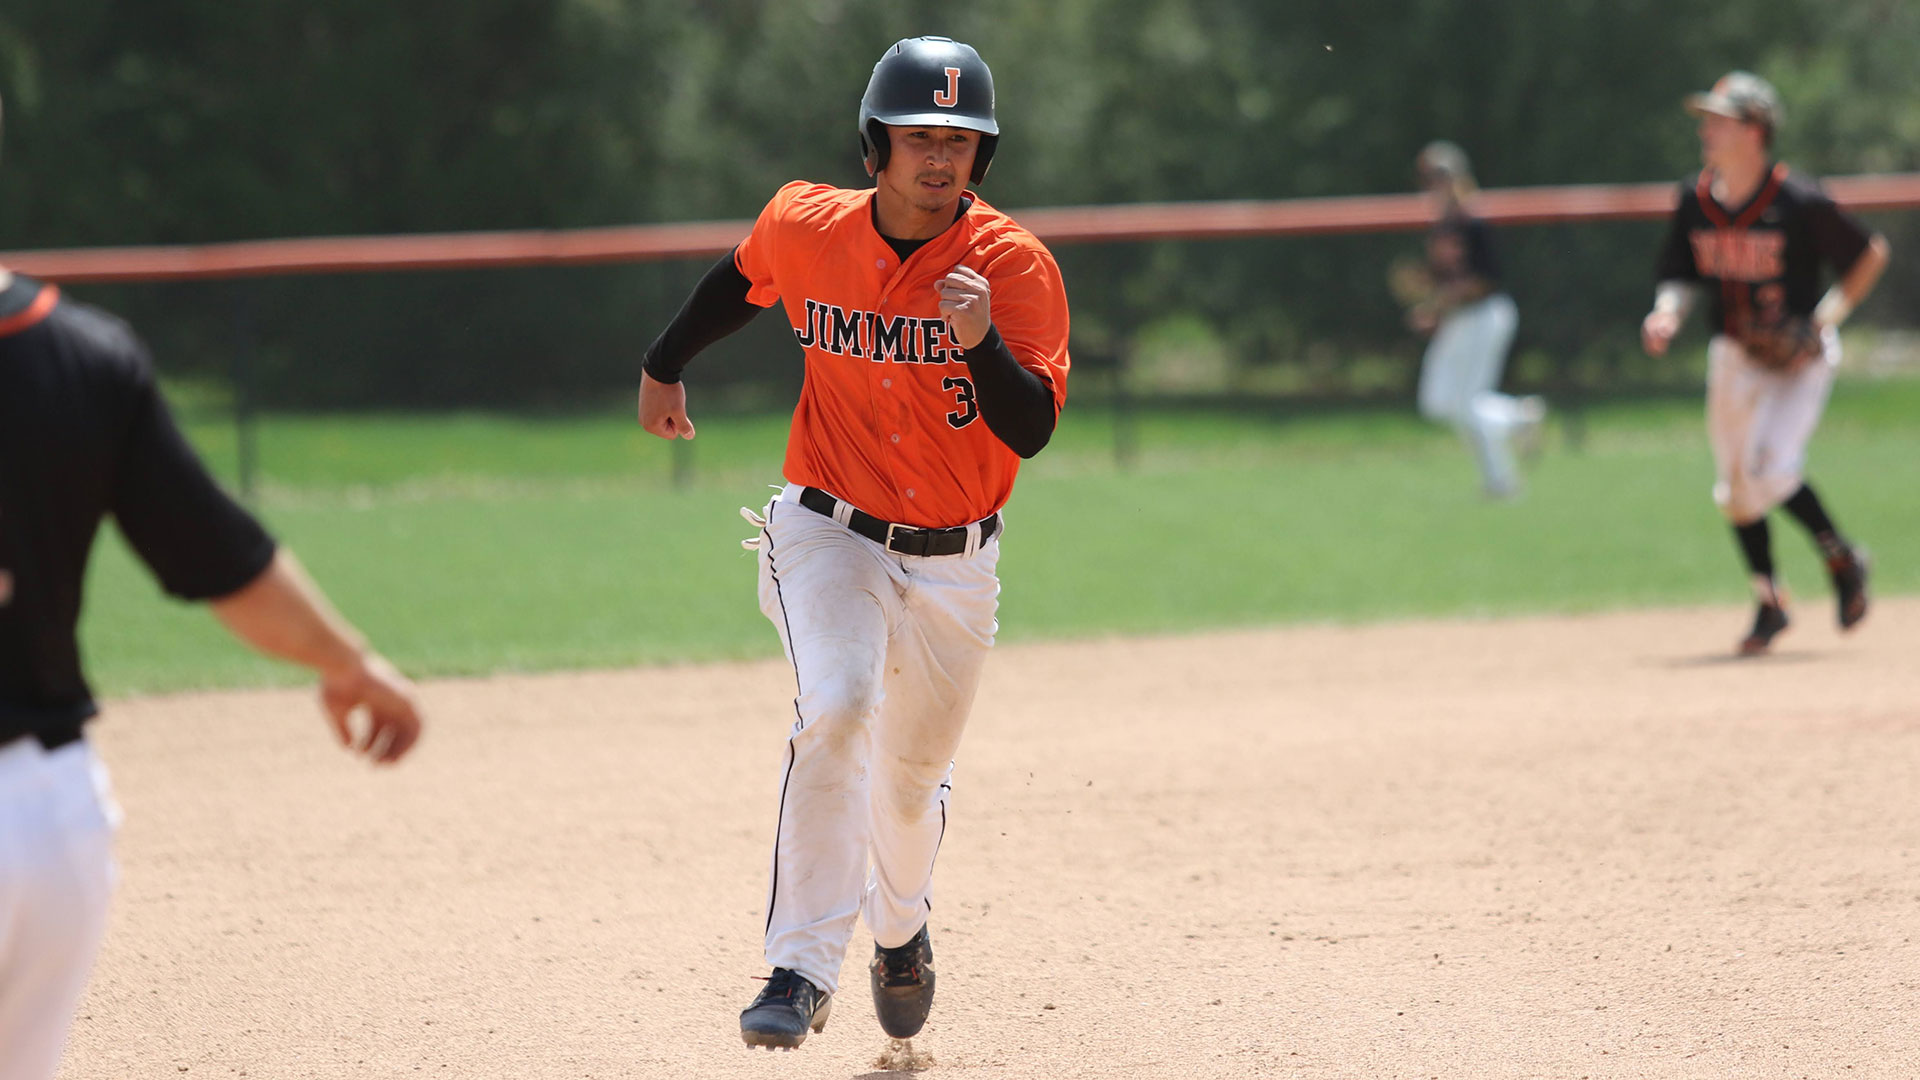 Jimmies drop doubleheader to Morningside